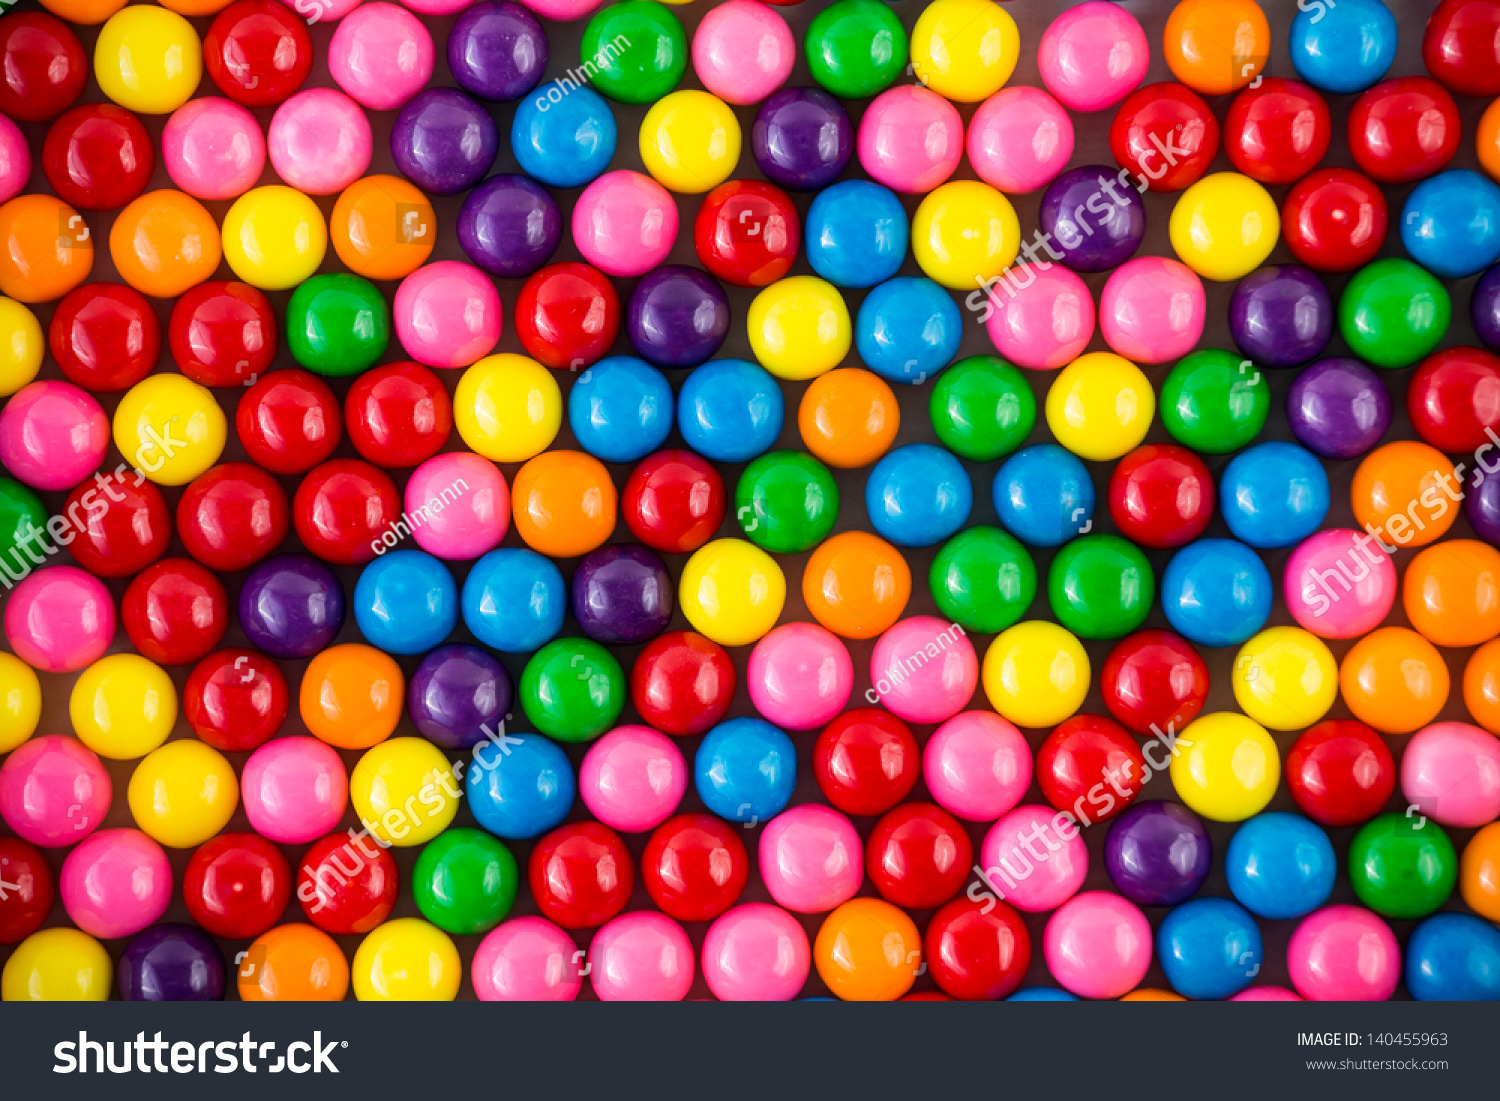 Brightly colored gum balls laying flat, background #140455963